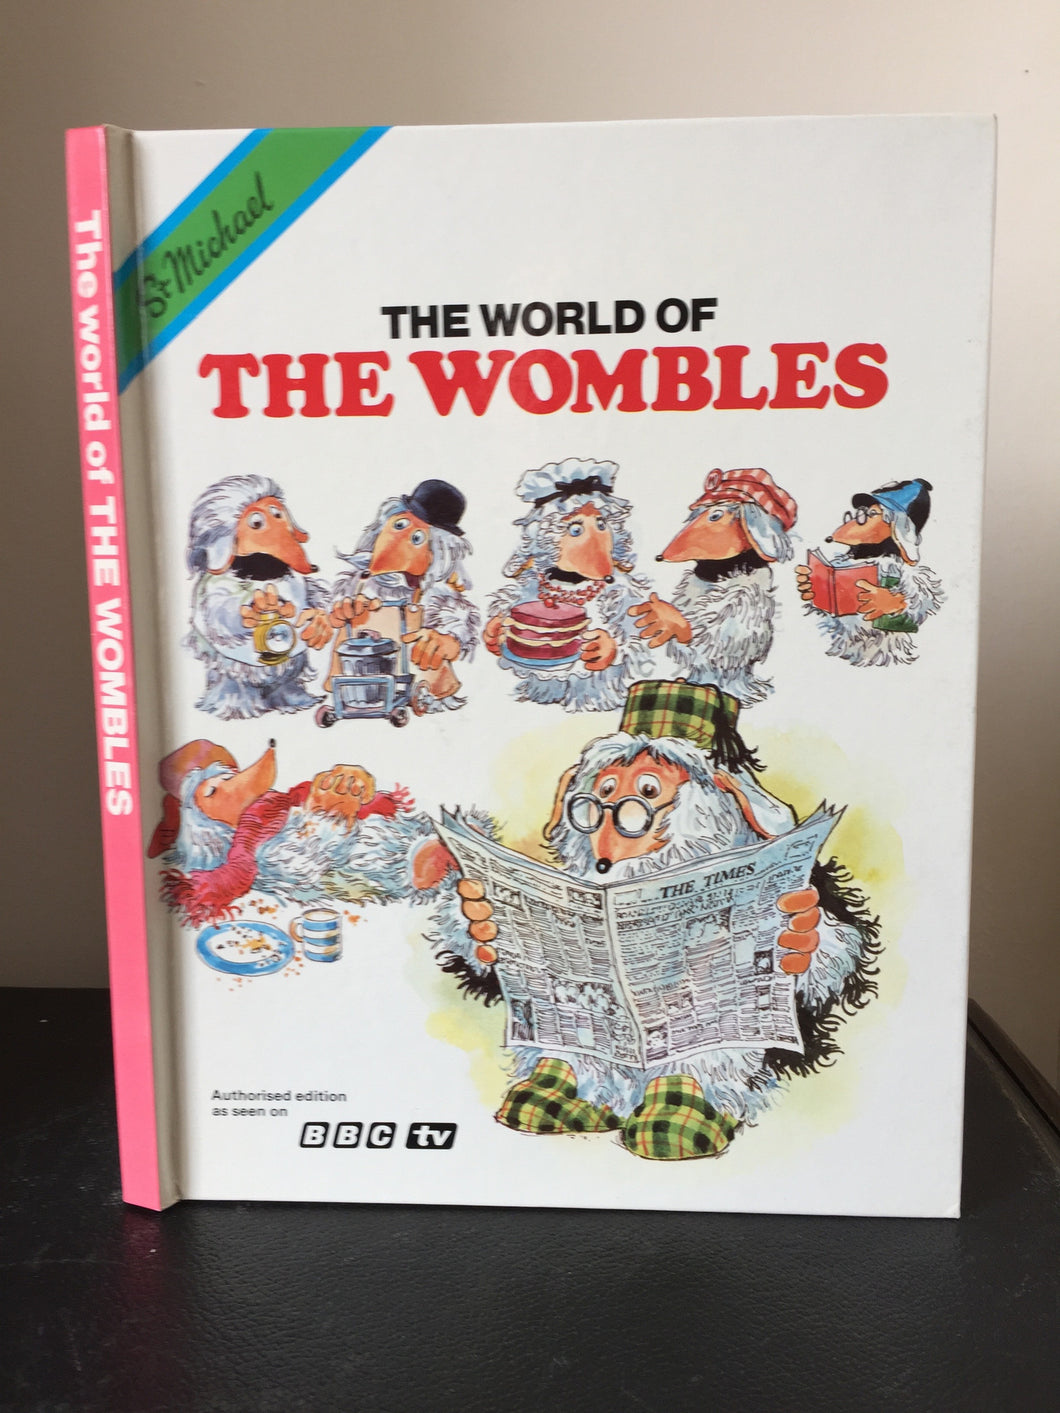 The World of The Wombles